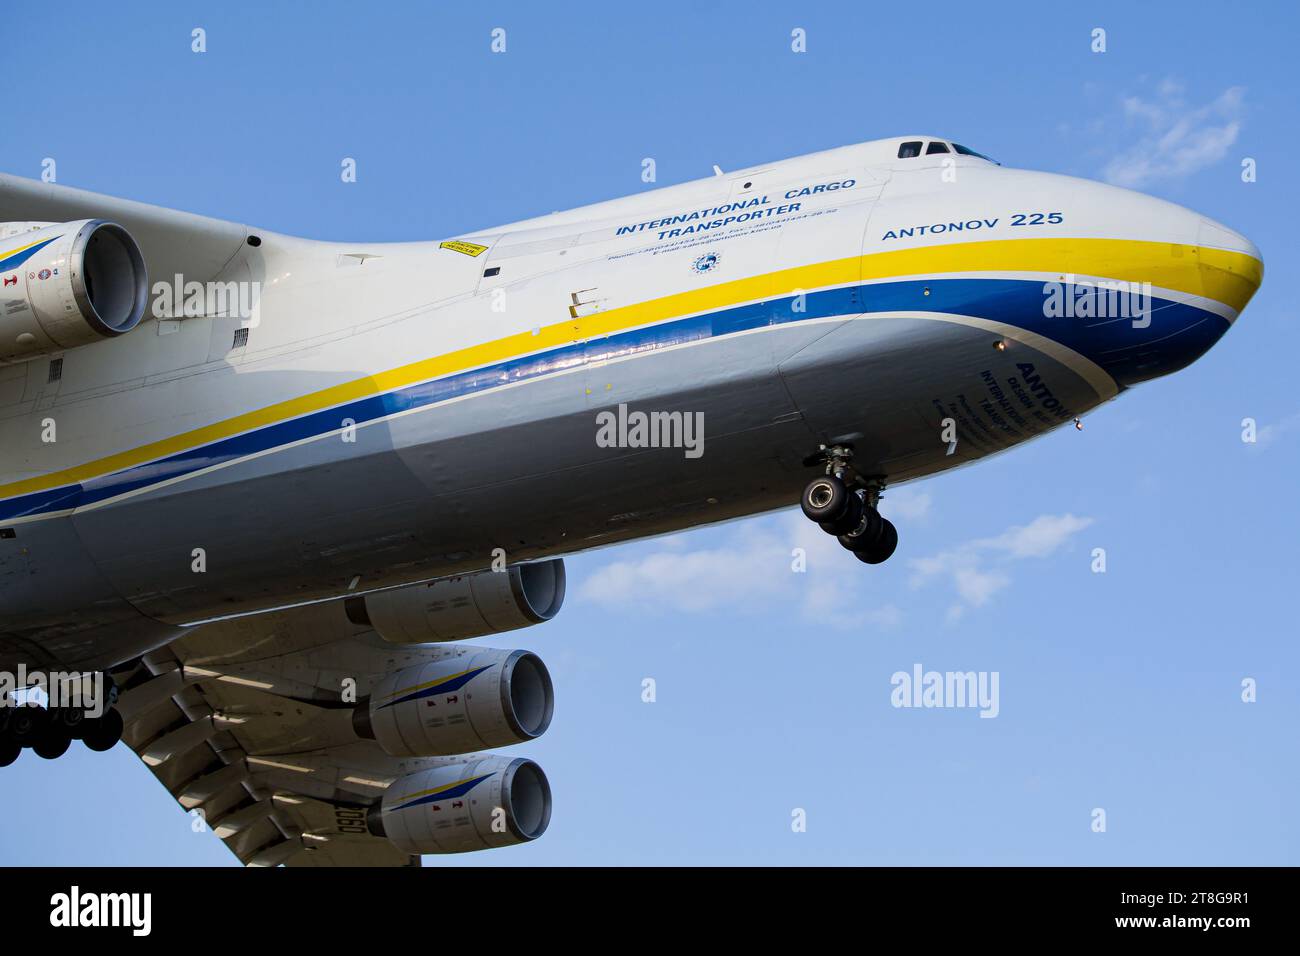 The biggest aircraft in the world - Antonov An-225 Mriya coming for a landing at Kyiv Hostomel Airport. High-quality photo Stock Photo